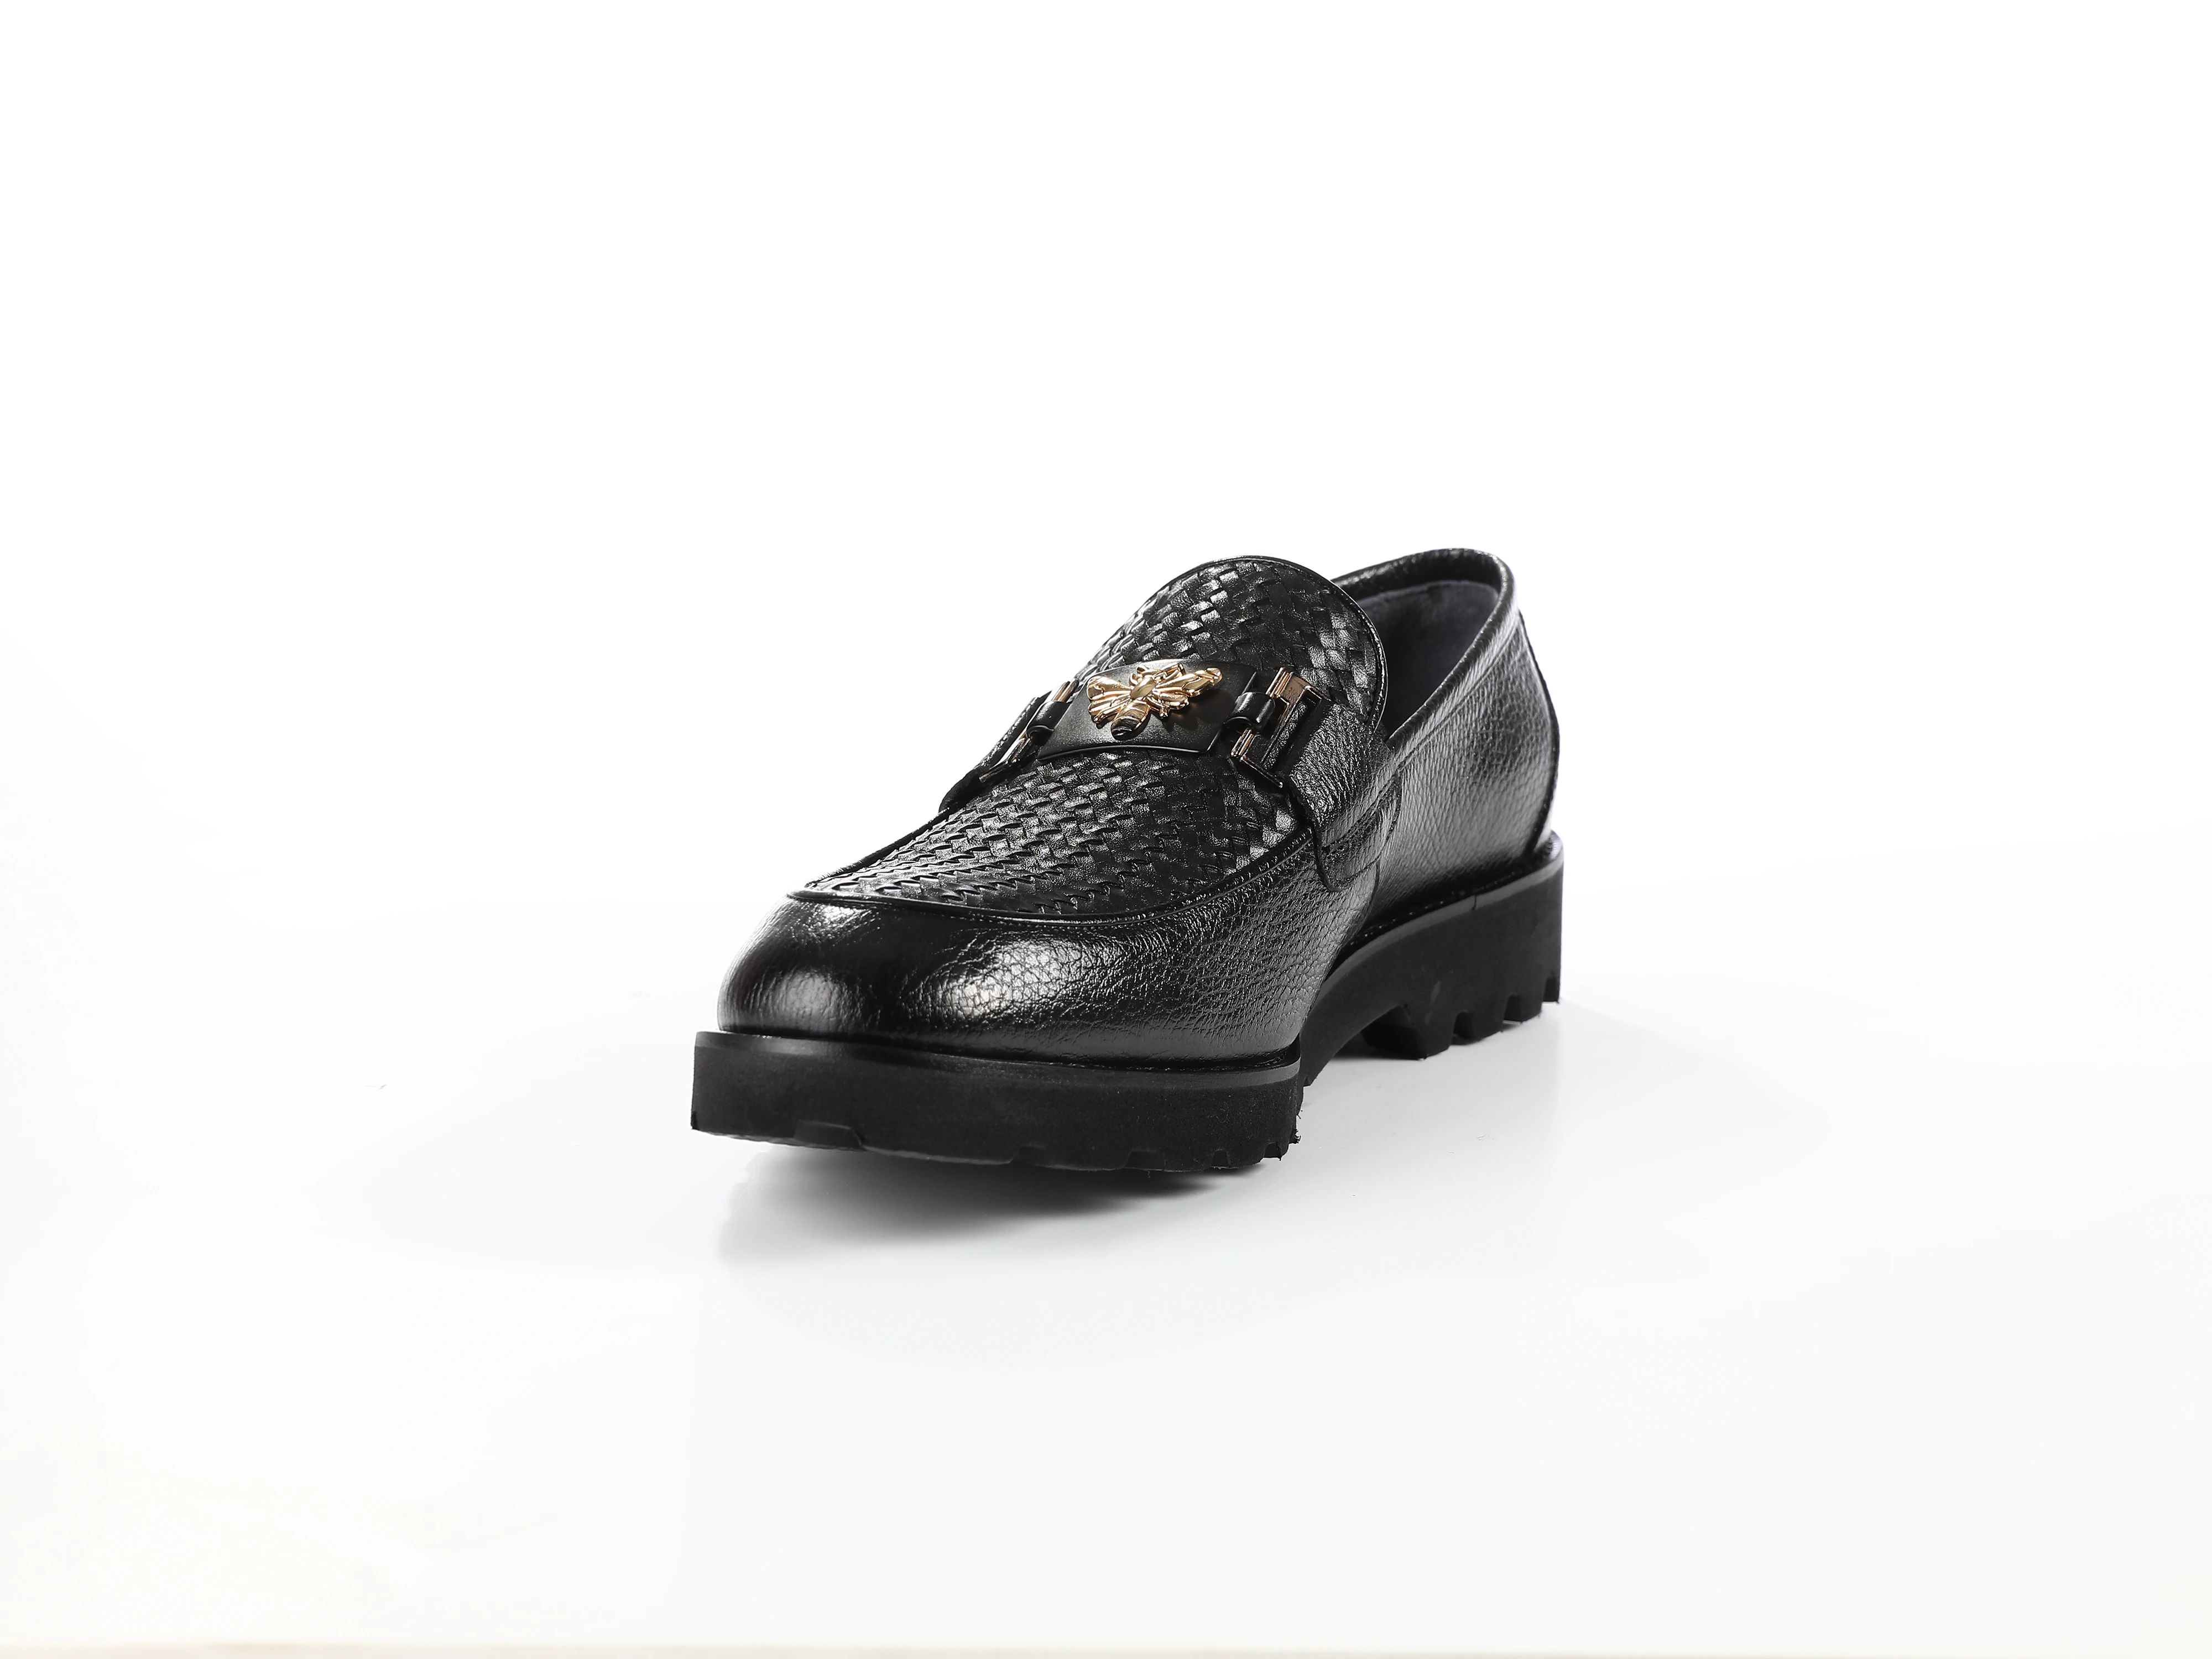 Genuine Leather Handmade Black Casual Shoes - ROSE01